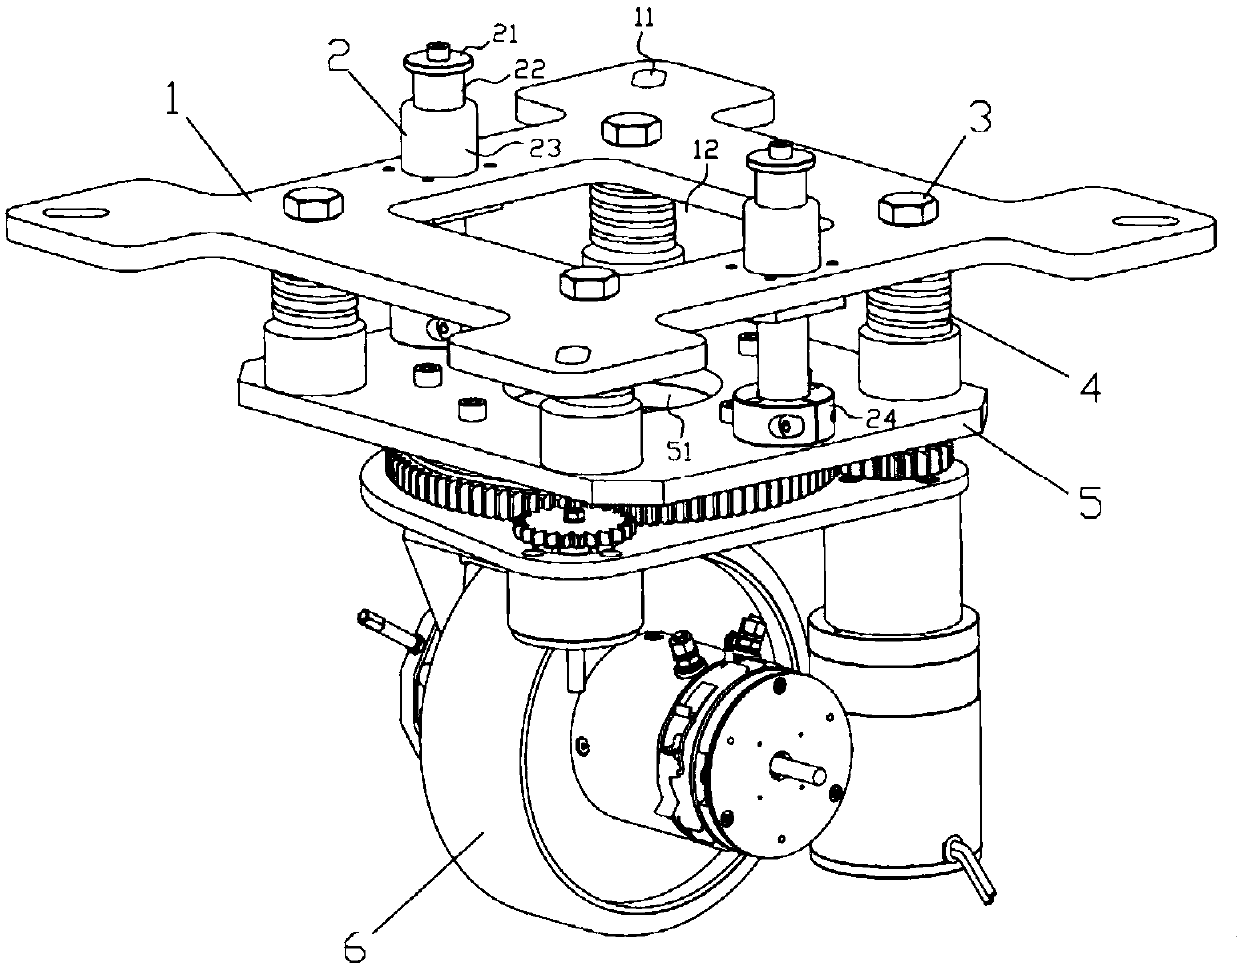 Steering wheel connecting device for AGV (automatic guided vehicle)